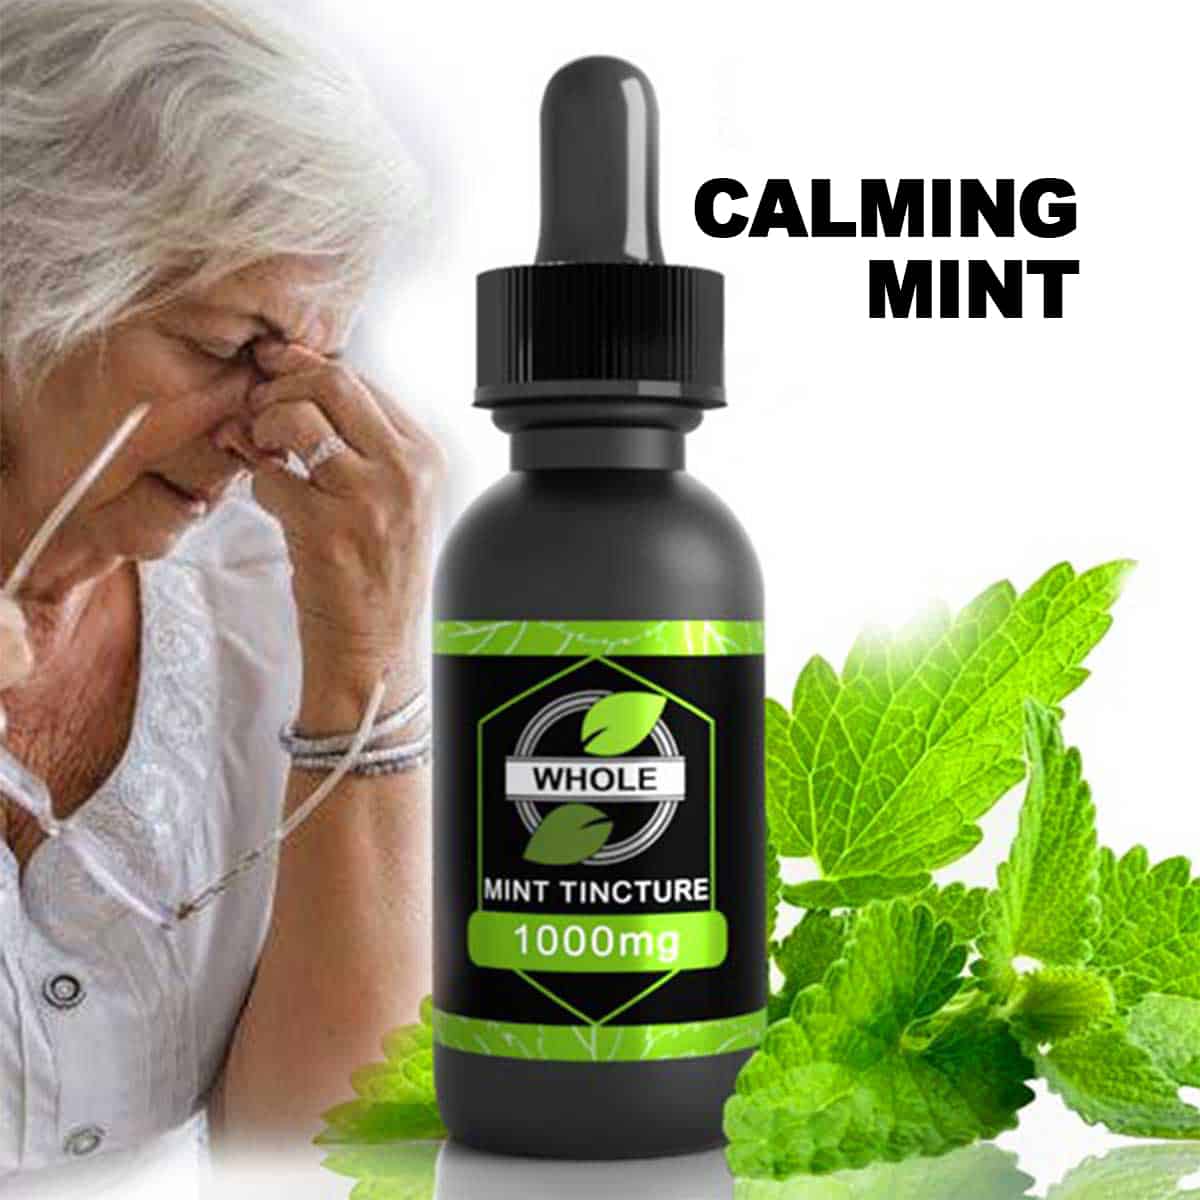 WHOLE-MINT-1000MG-MINT-CBD-OIL-TINCTURE-WITH-NATURAL-HERBAL-EXTRACTS-2